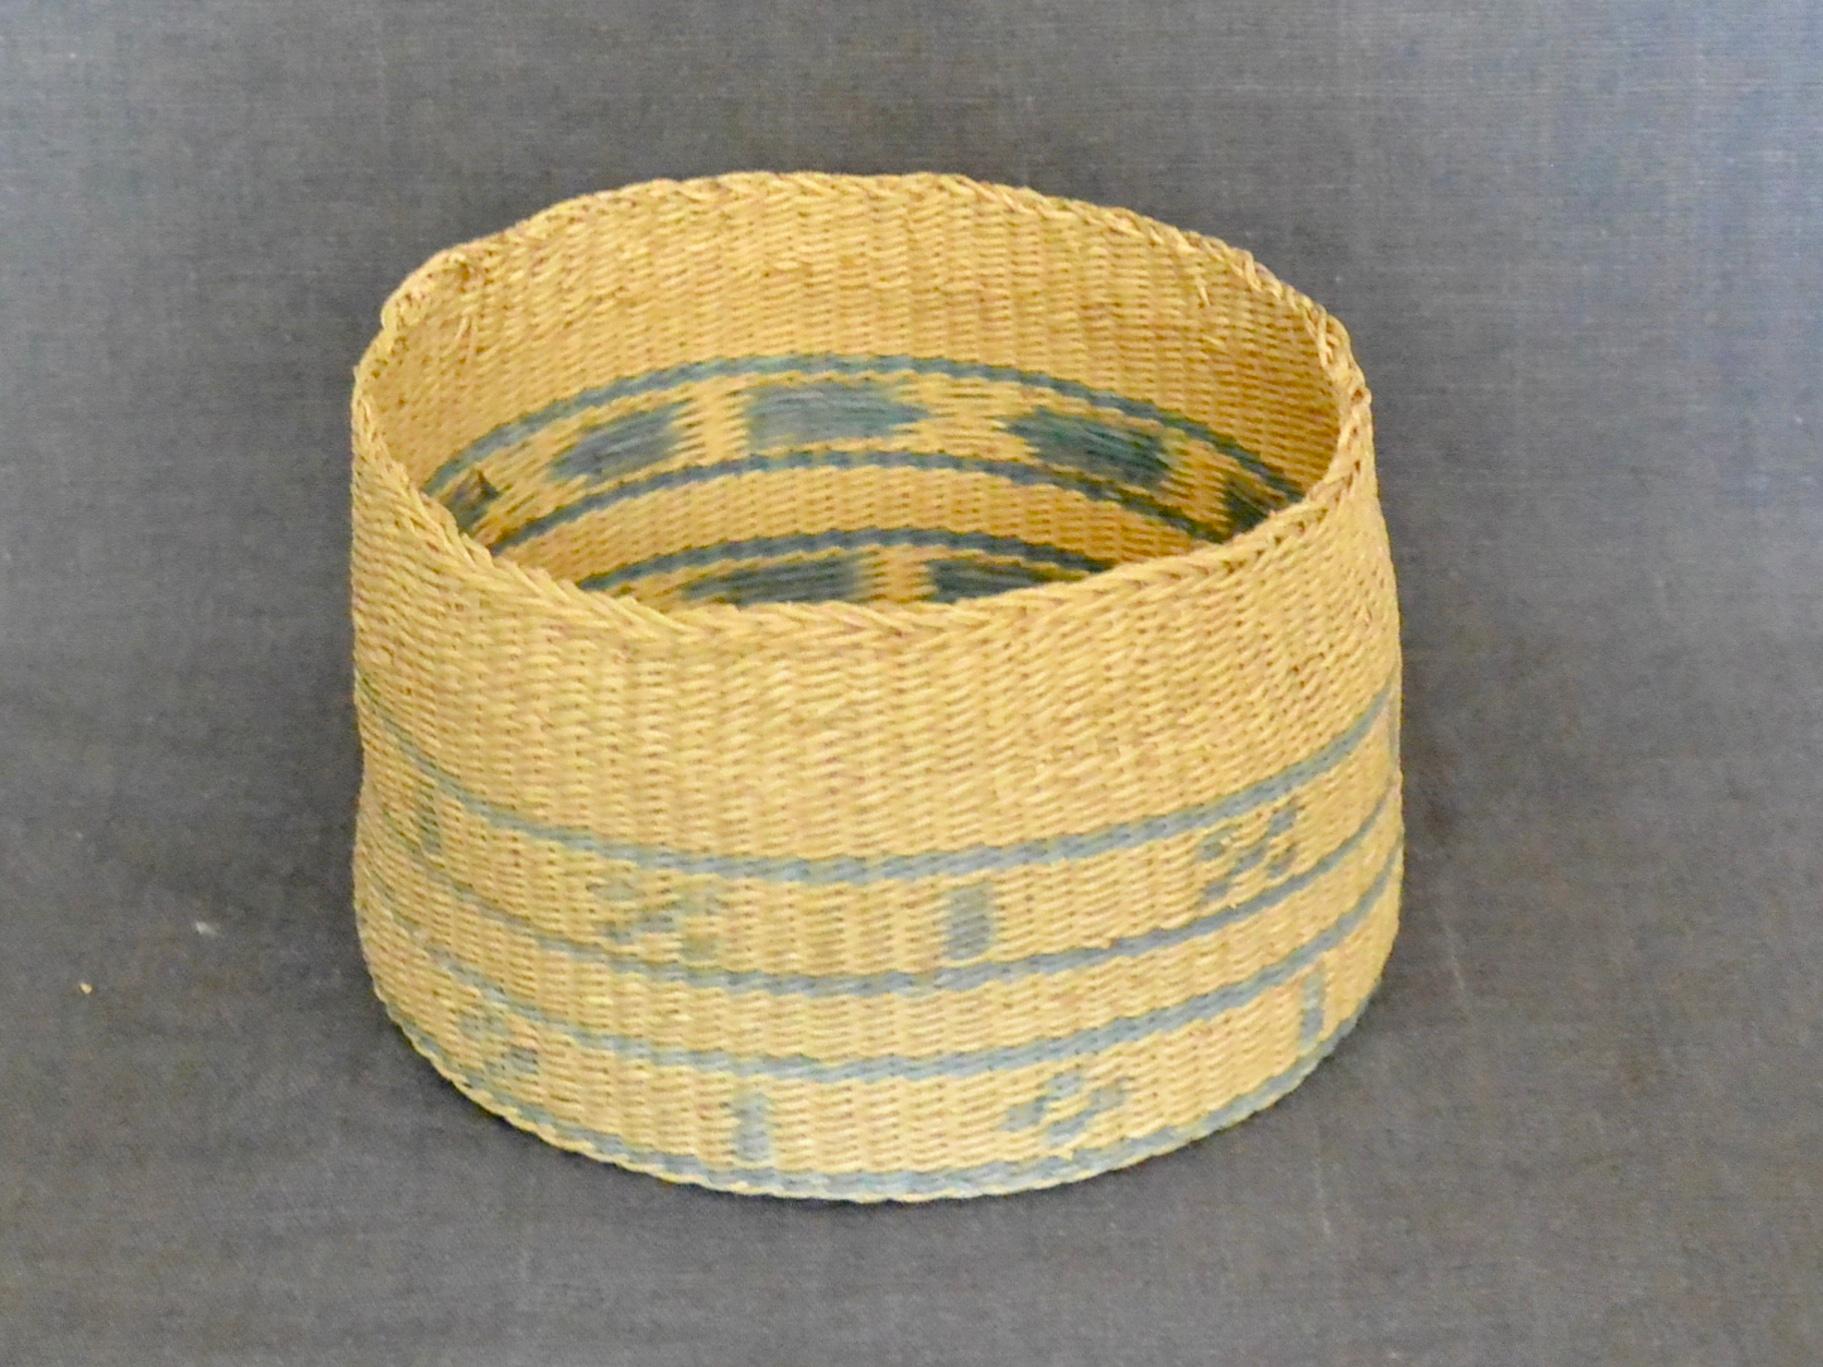 Native American small basket. Small finely woven natural sea grass basket with decorative geometric bands in baby blue, North America, late 19th century.
Dimension: 4.5